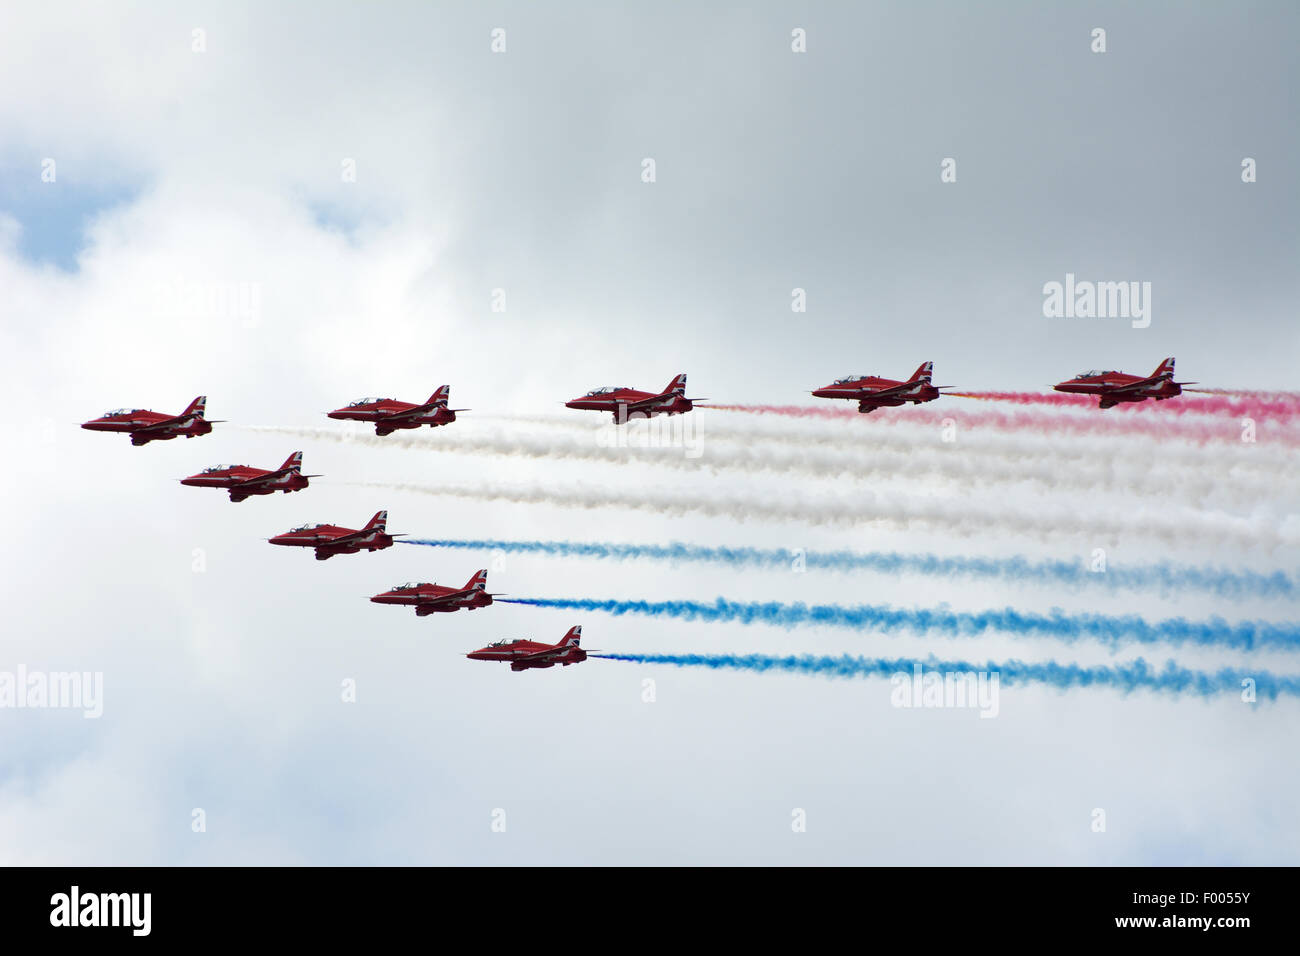 The Red Arrows dispay Team Silverstone British GP F1 July 2016 Stock Photo